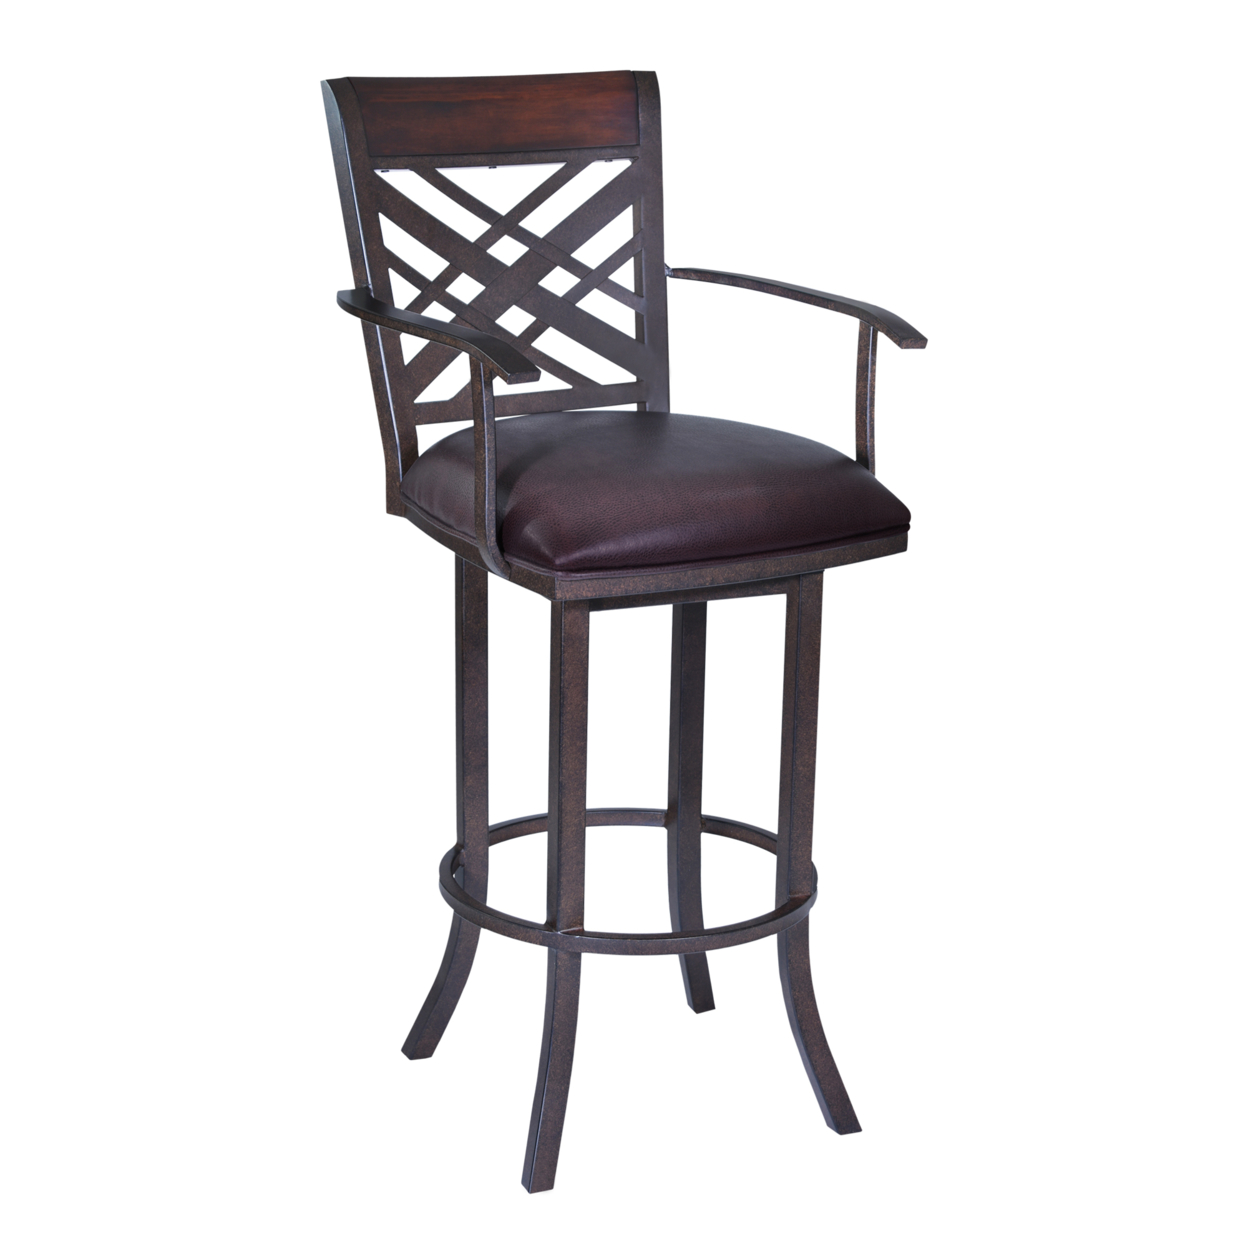 30 Inch Metal Swivel Bar Stool With Armrests And Leatherette Seat, Brown- Saltoro Sherpi